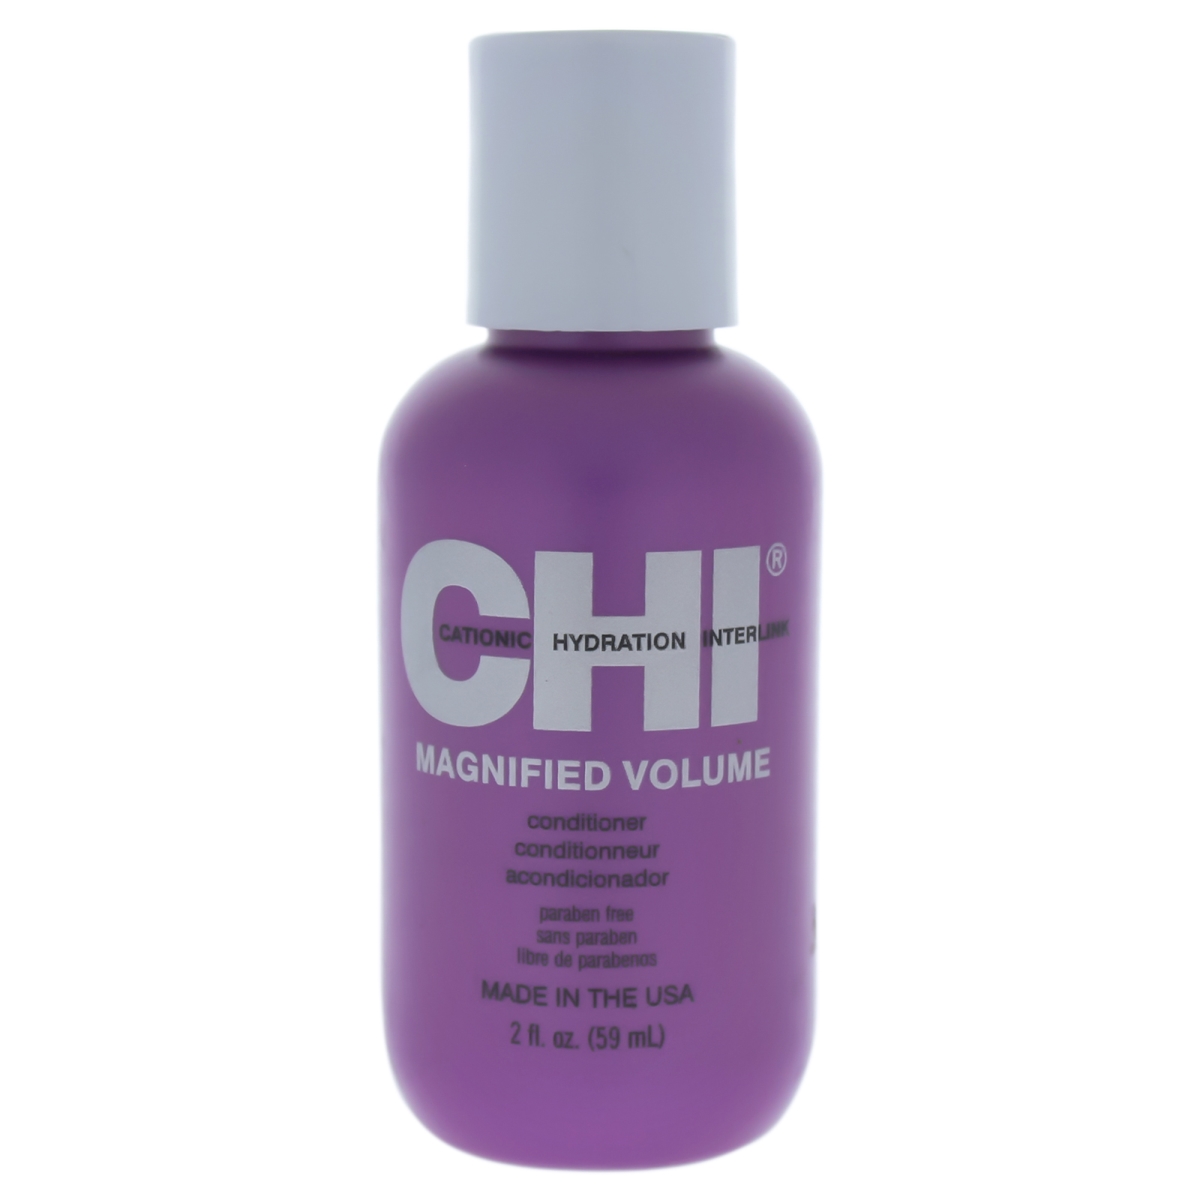 I0084074 Magnified Volume Conditioner For Unisex - 2 Oz